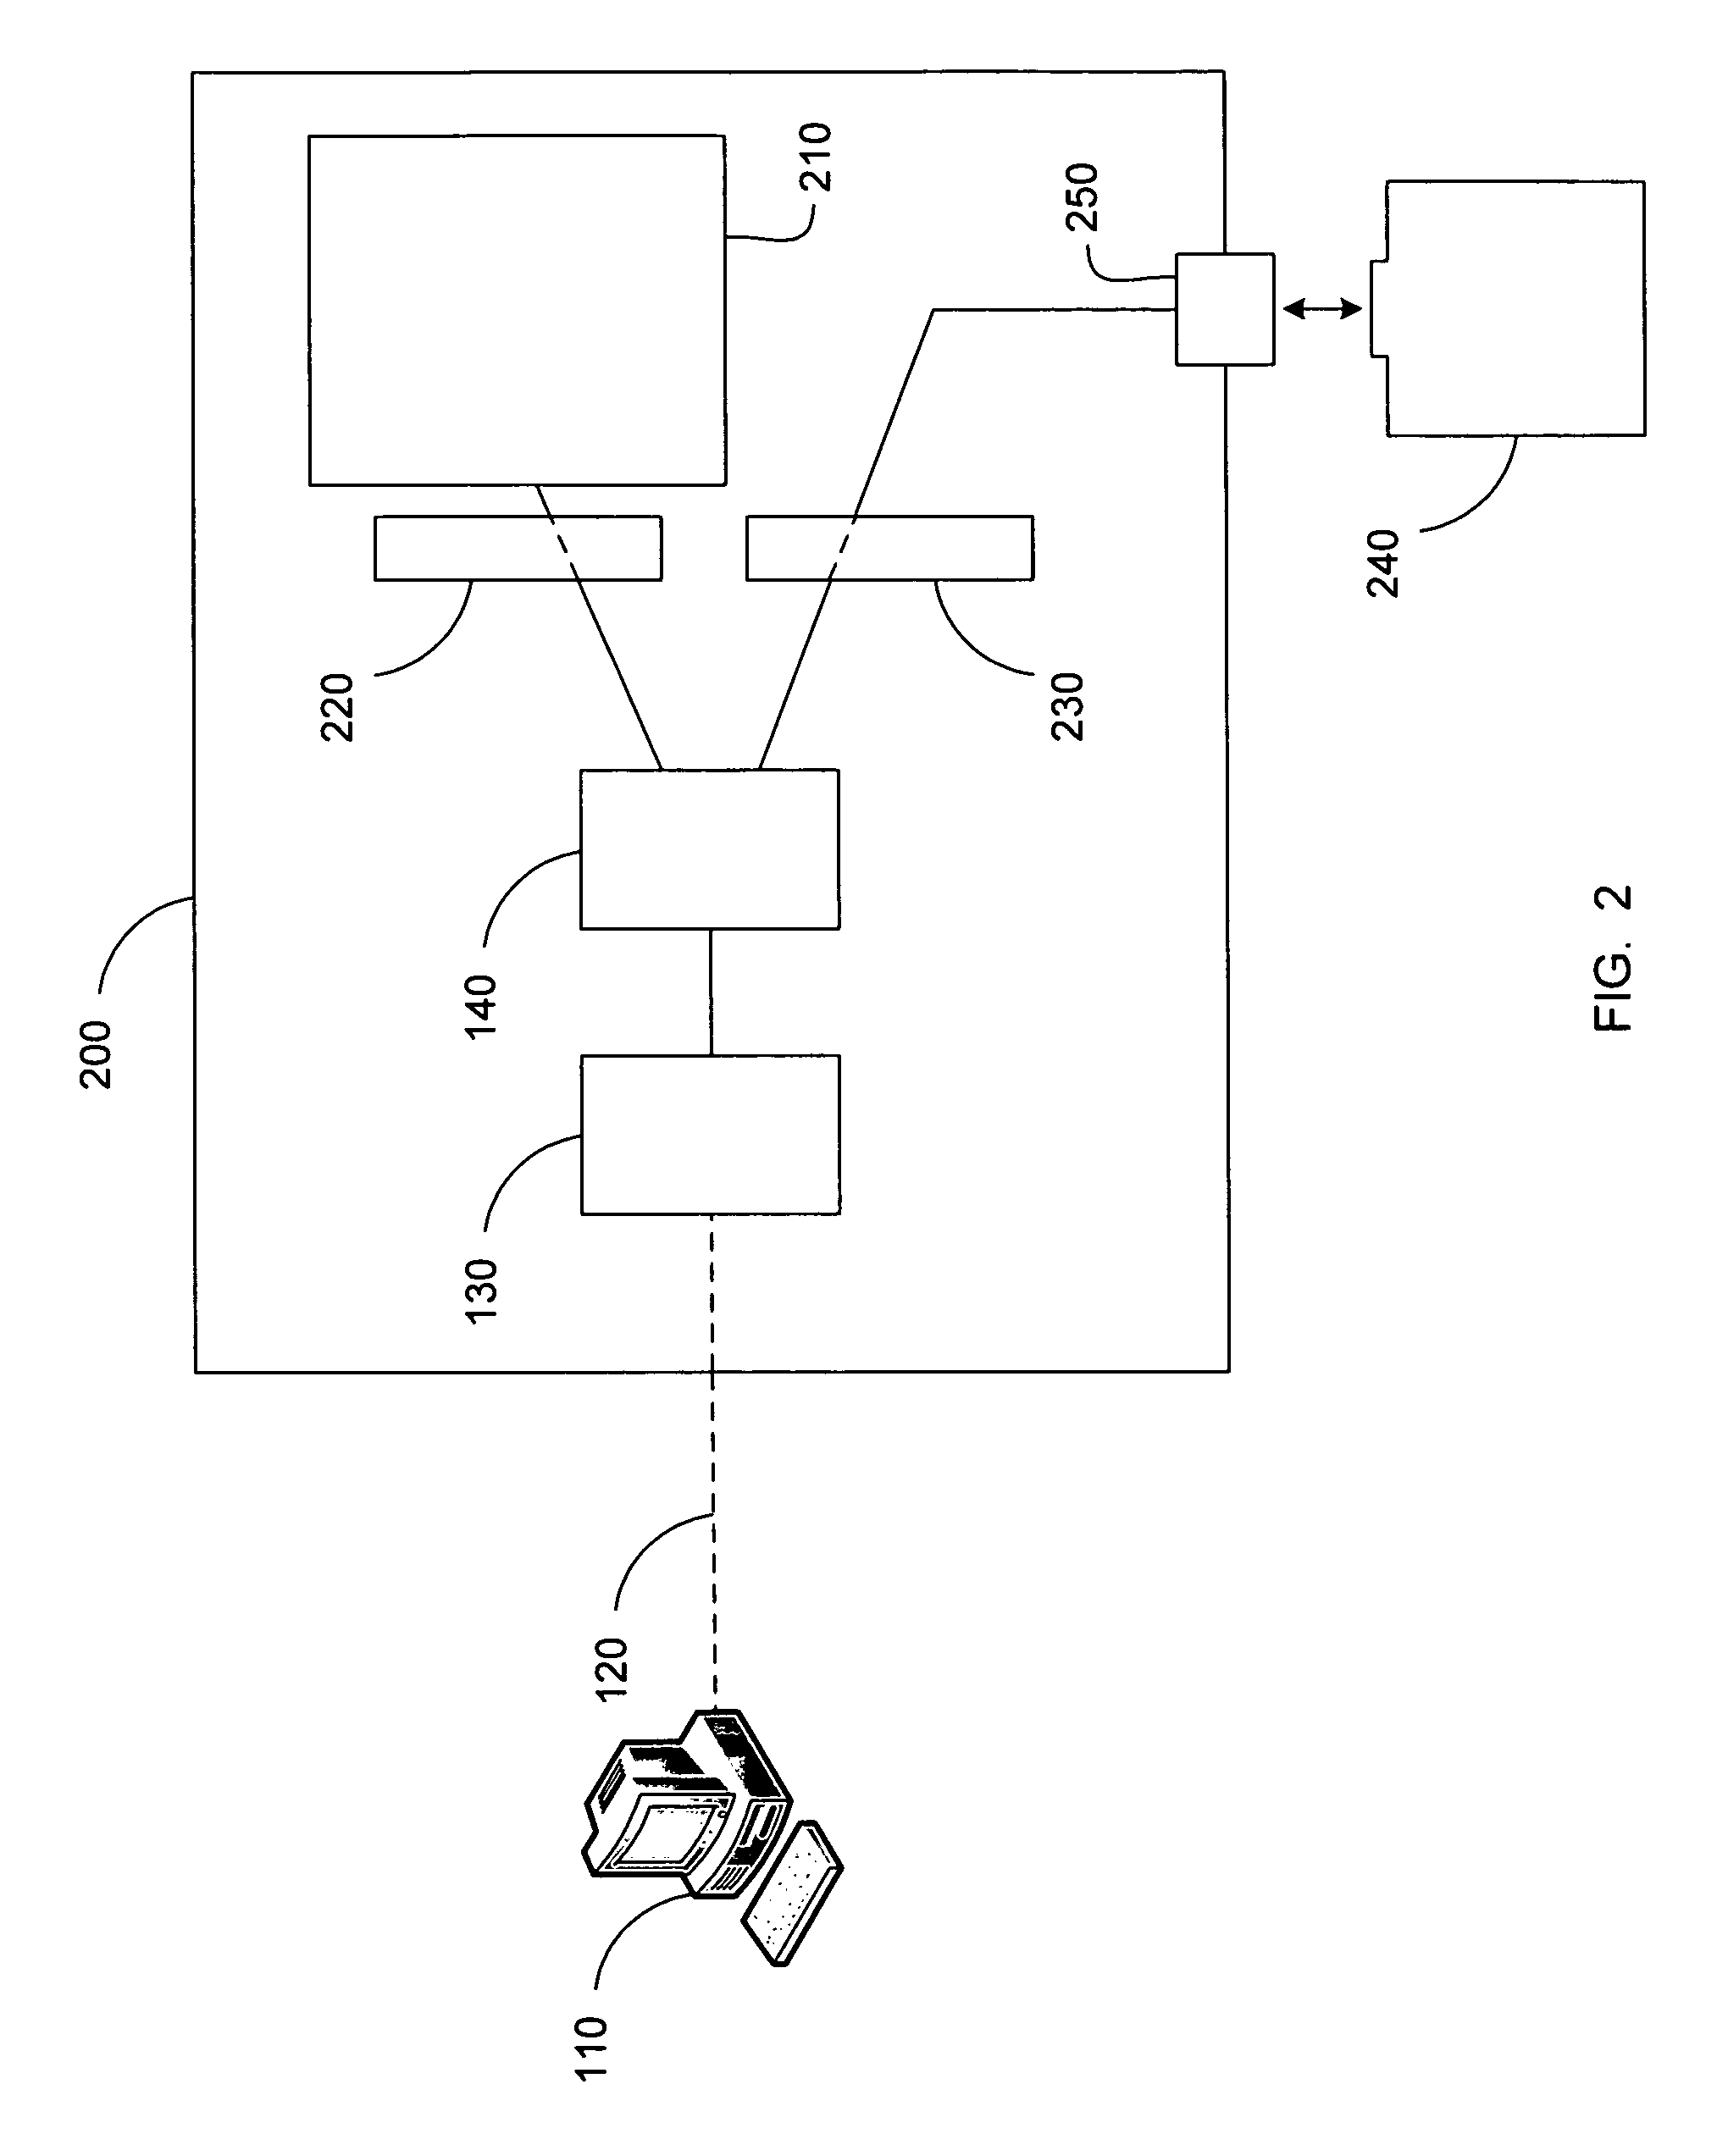 Methods for selectively copying data files to networked storage and devices for initiating the same